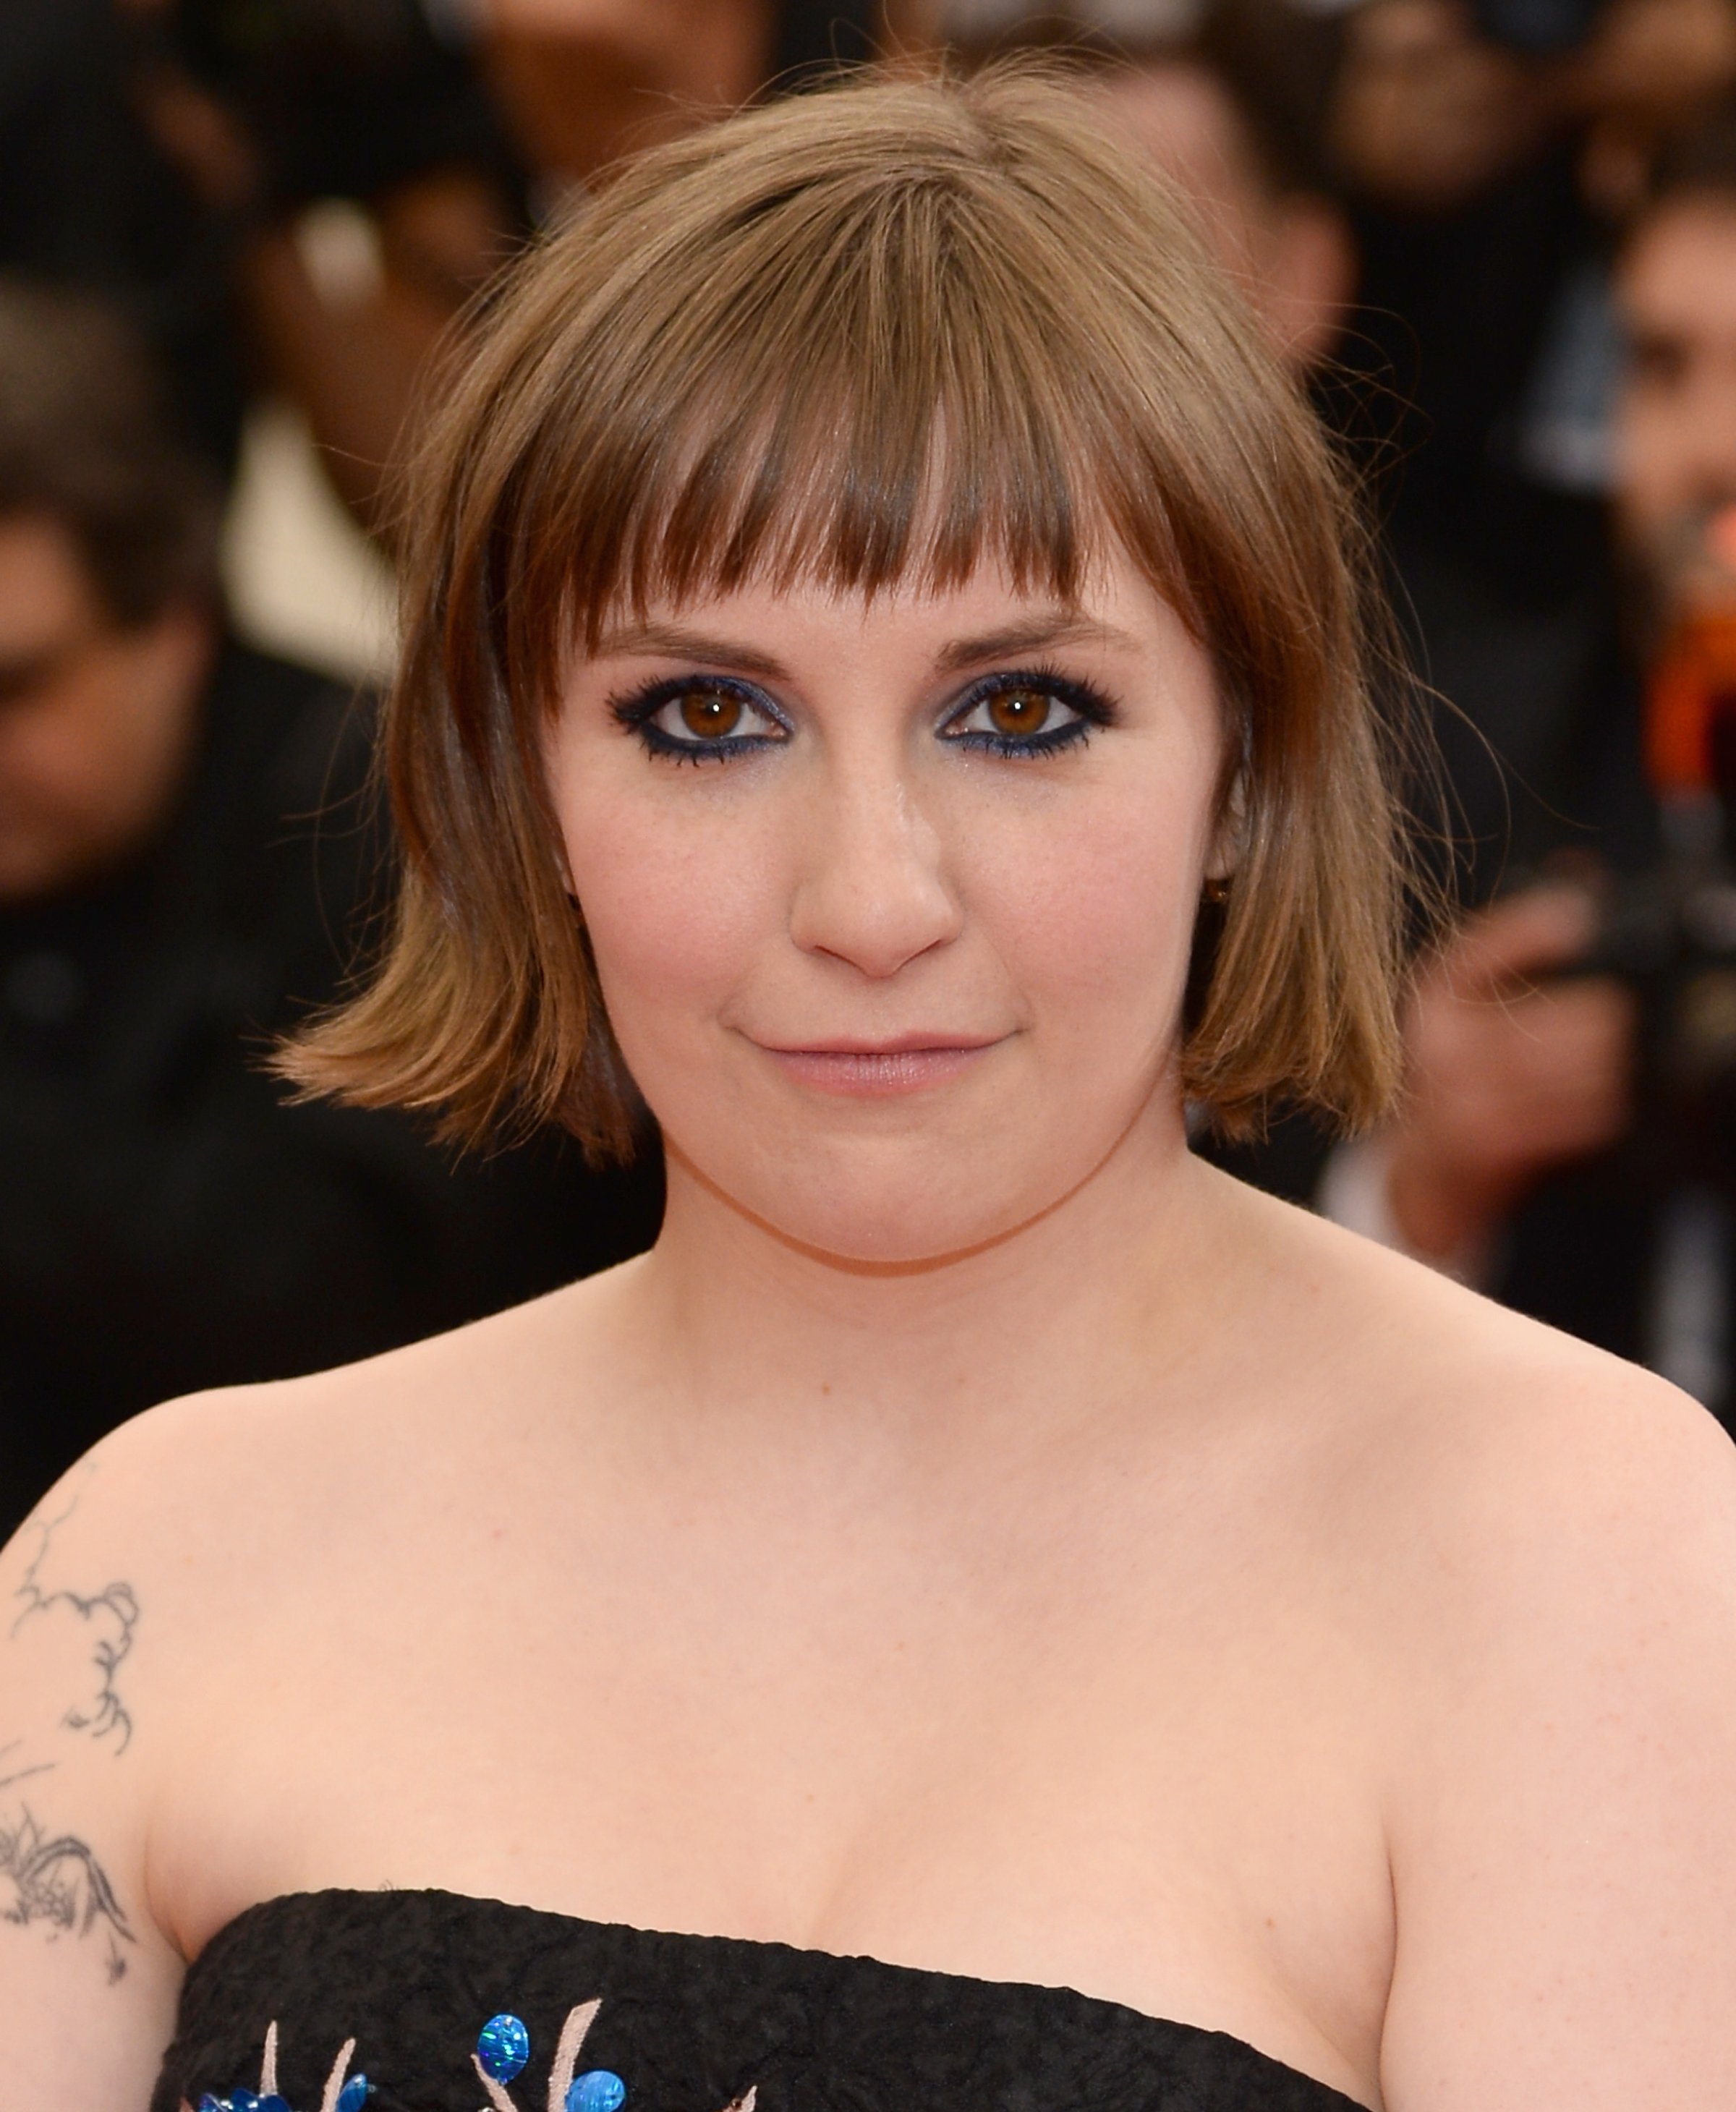 Lena Dunham attends the "Charles James: Beyond Fashion" Costume Institute Gala at the Metropolitan Museum of Art on May 5, 2014 in New York City.